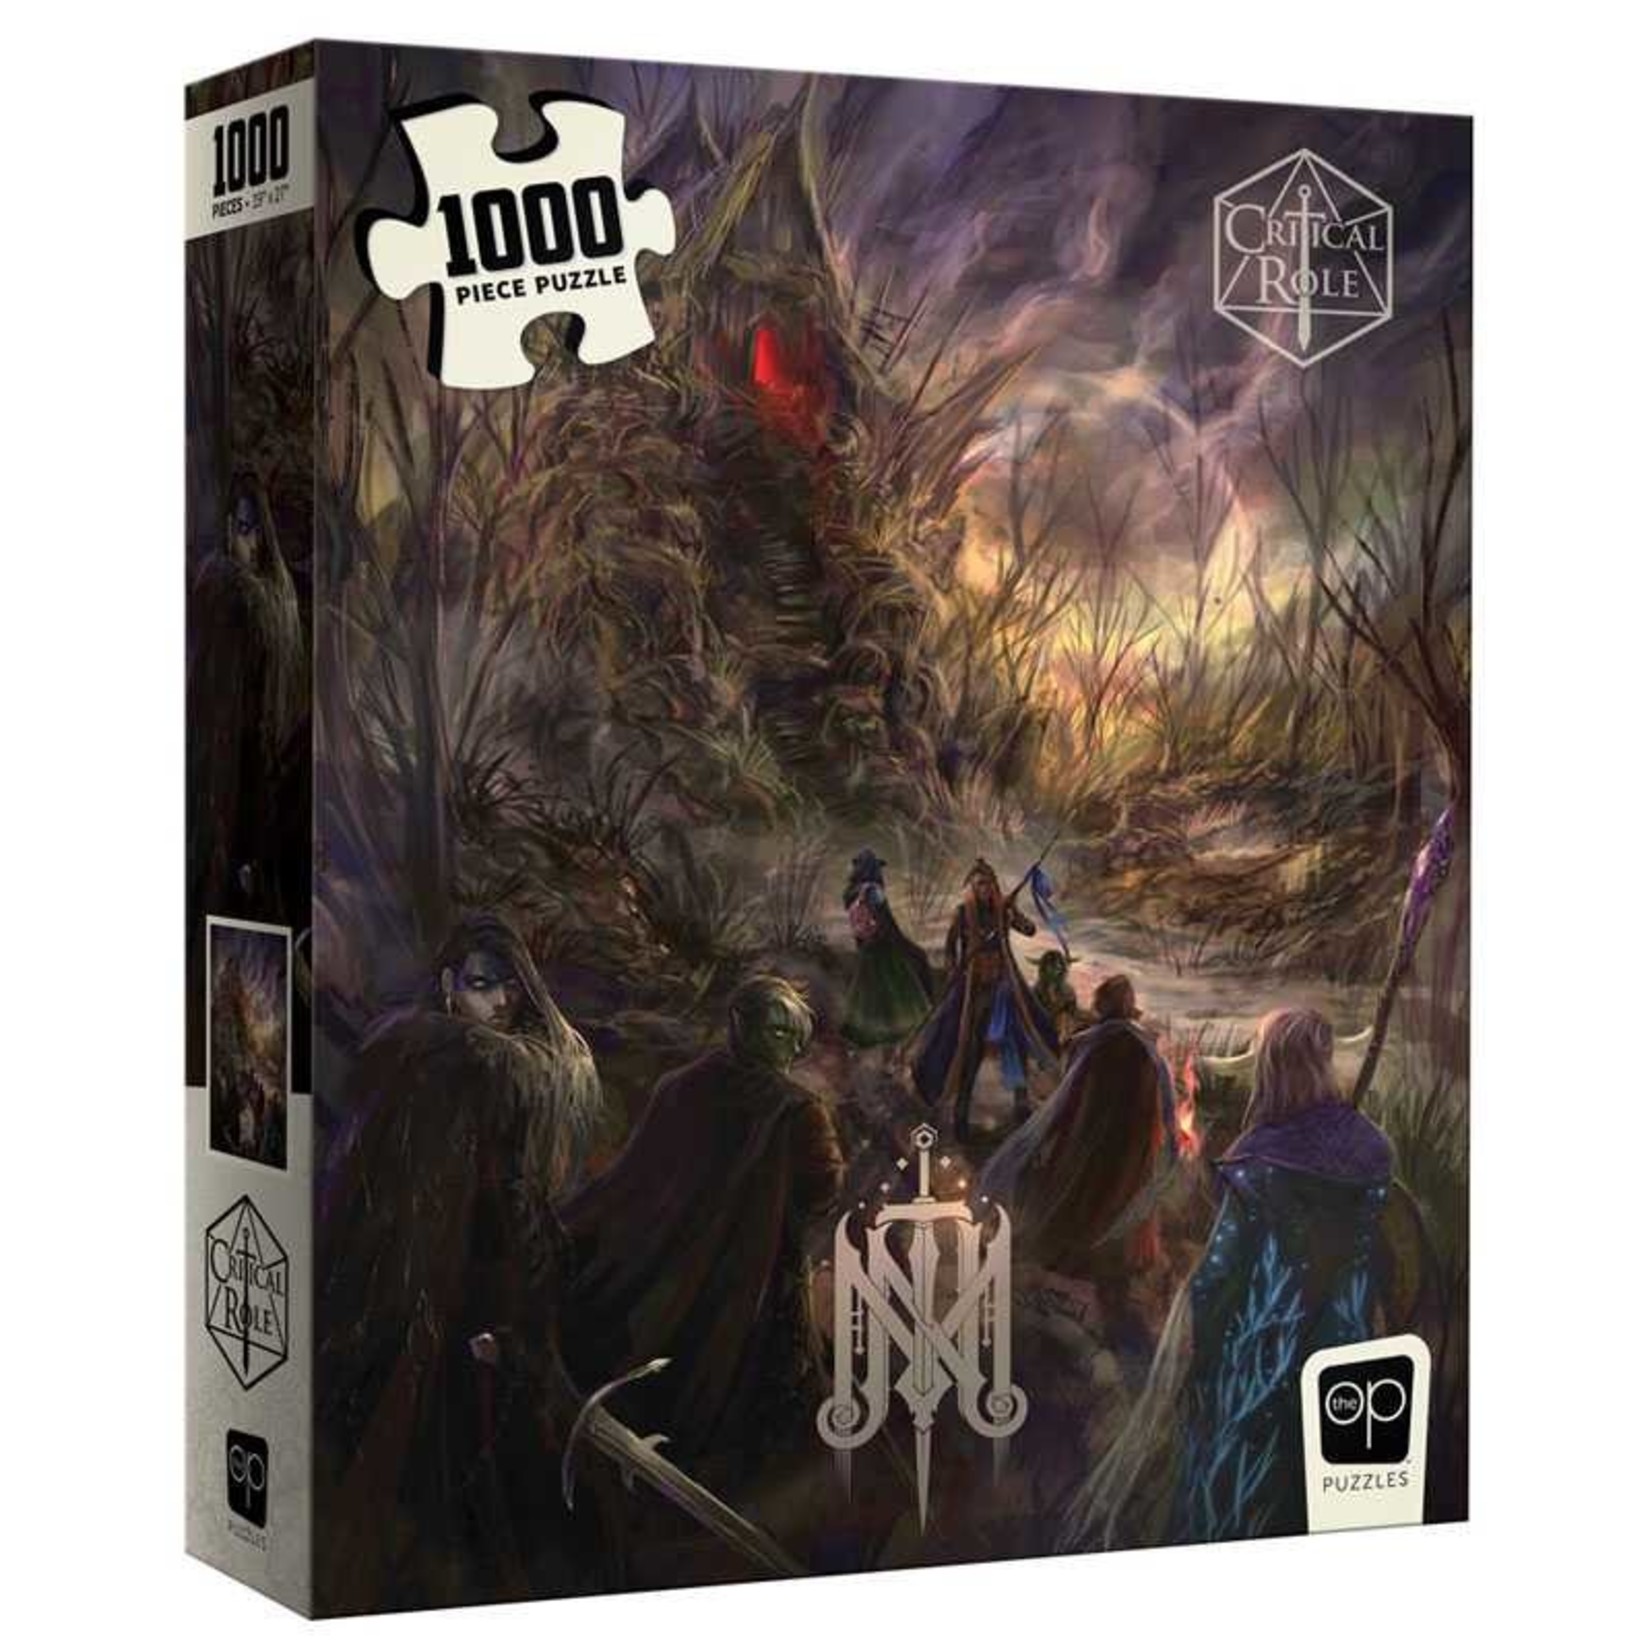 USAopoly 1000 pc Puzzle Critical Role Mighty Nein Isharnai's Hut